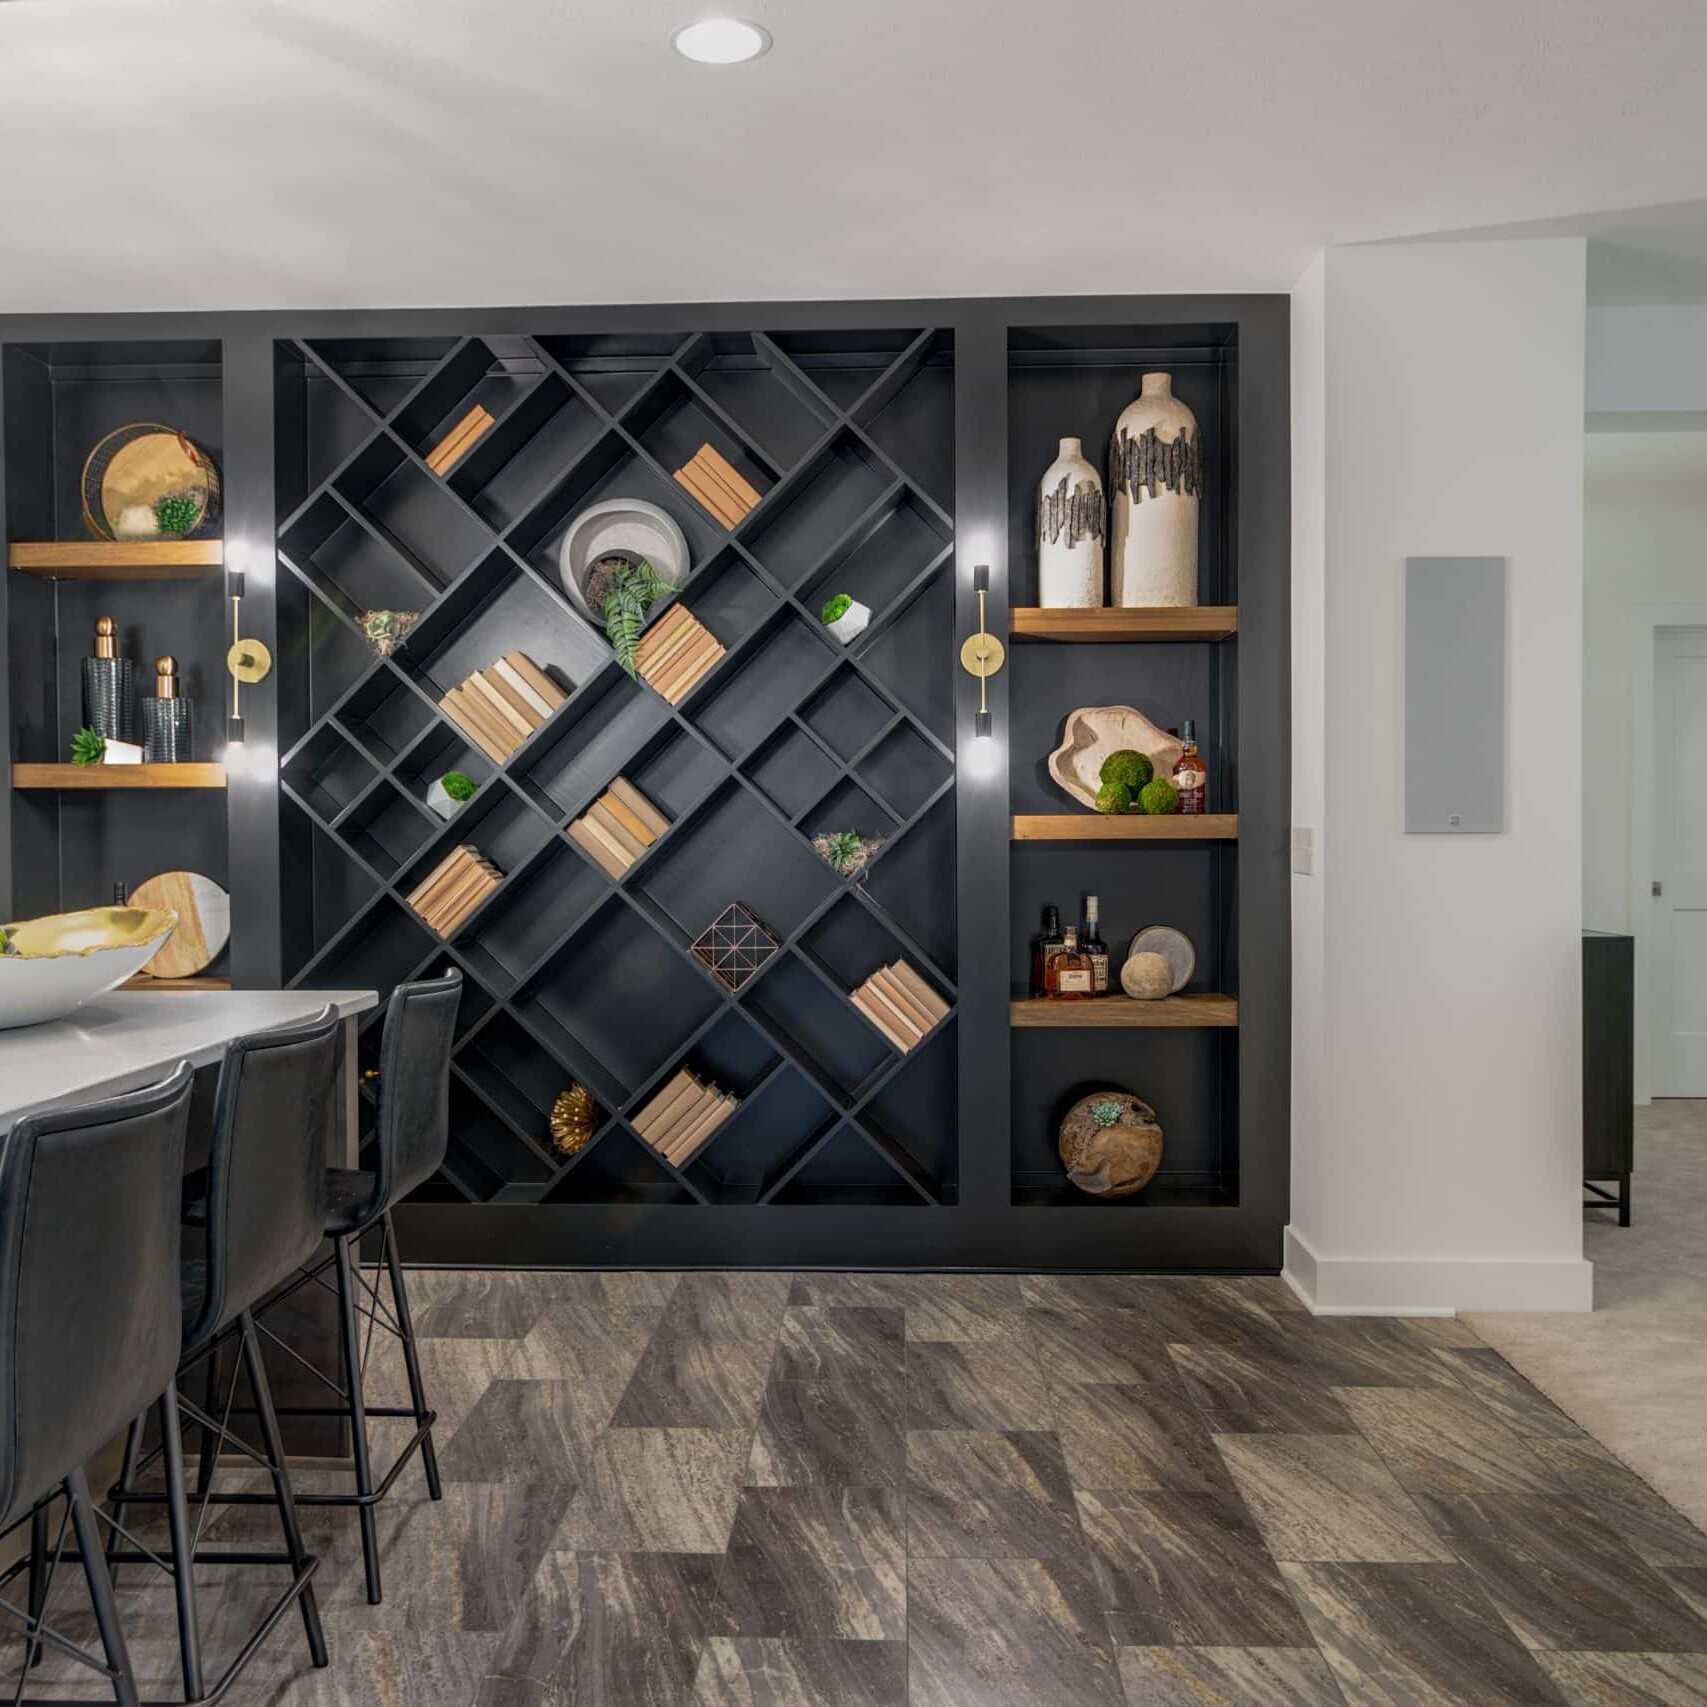 A kitchen with a black wine rack and stools.